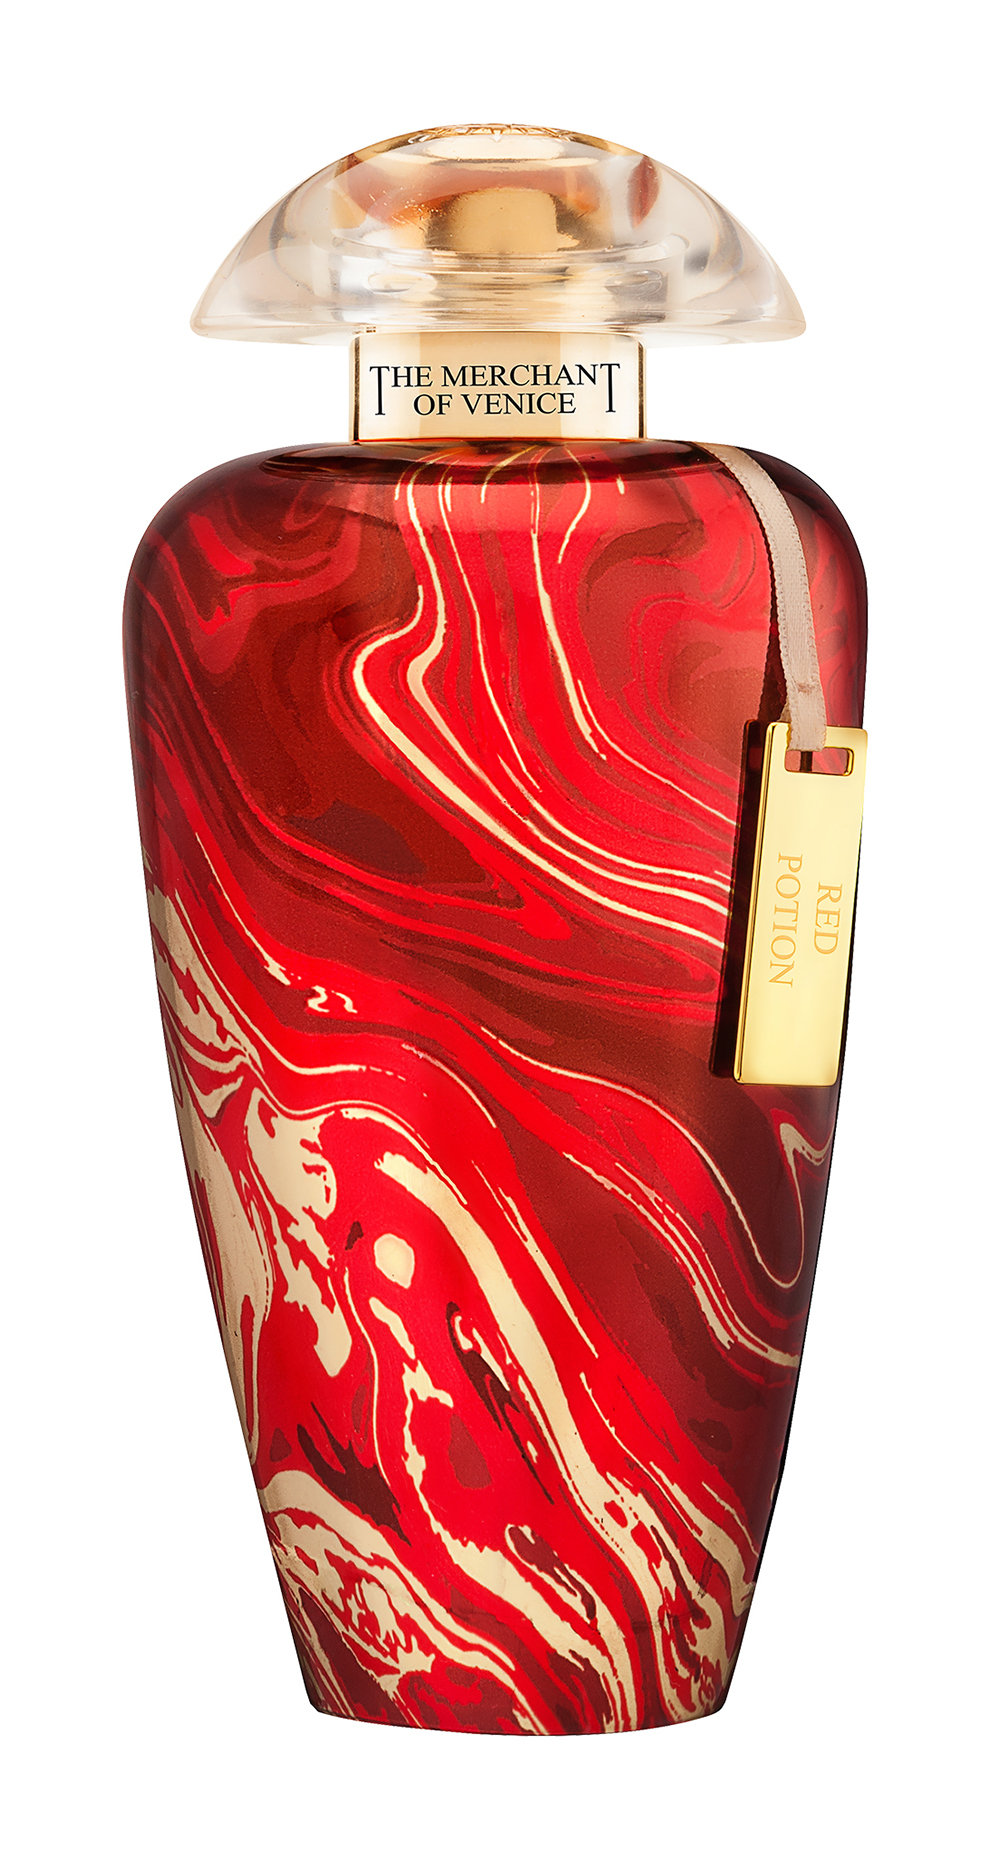 Парфюмерная вода THE MERCHANT OF VENICE Red Potion EDP женская, 50 мл architectural guide venice